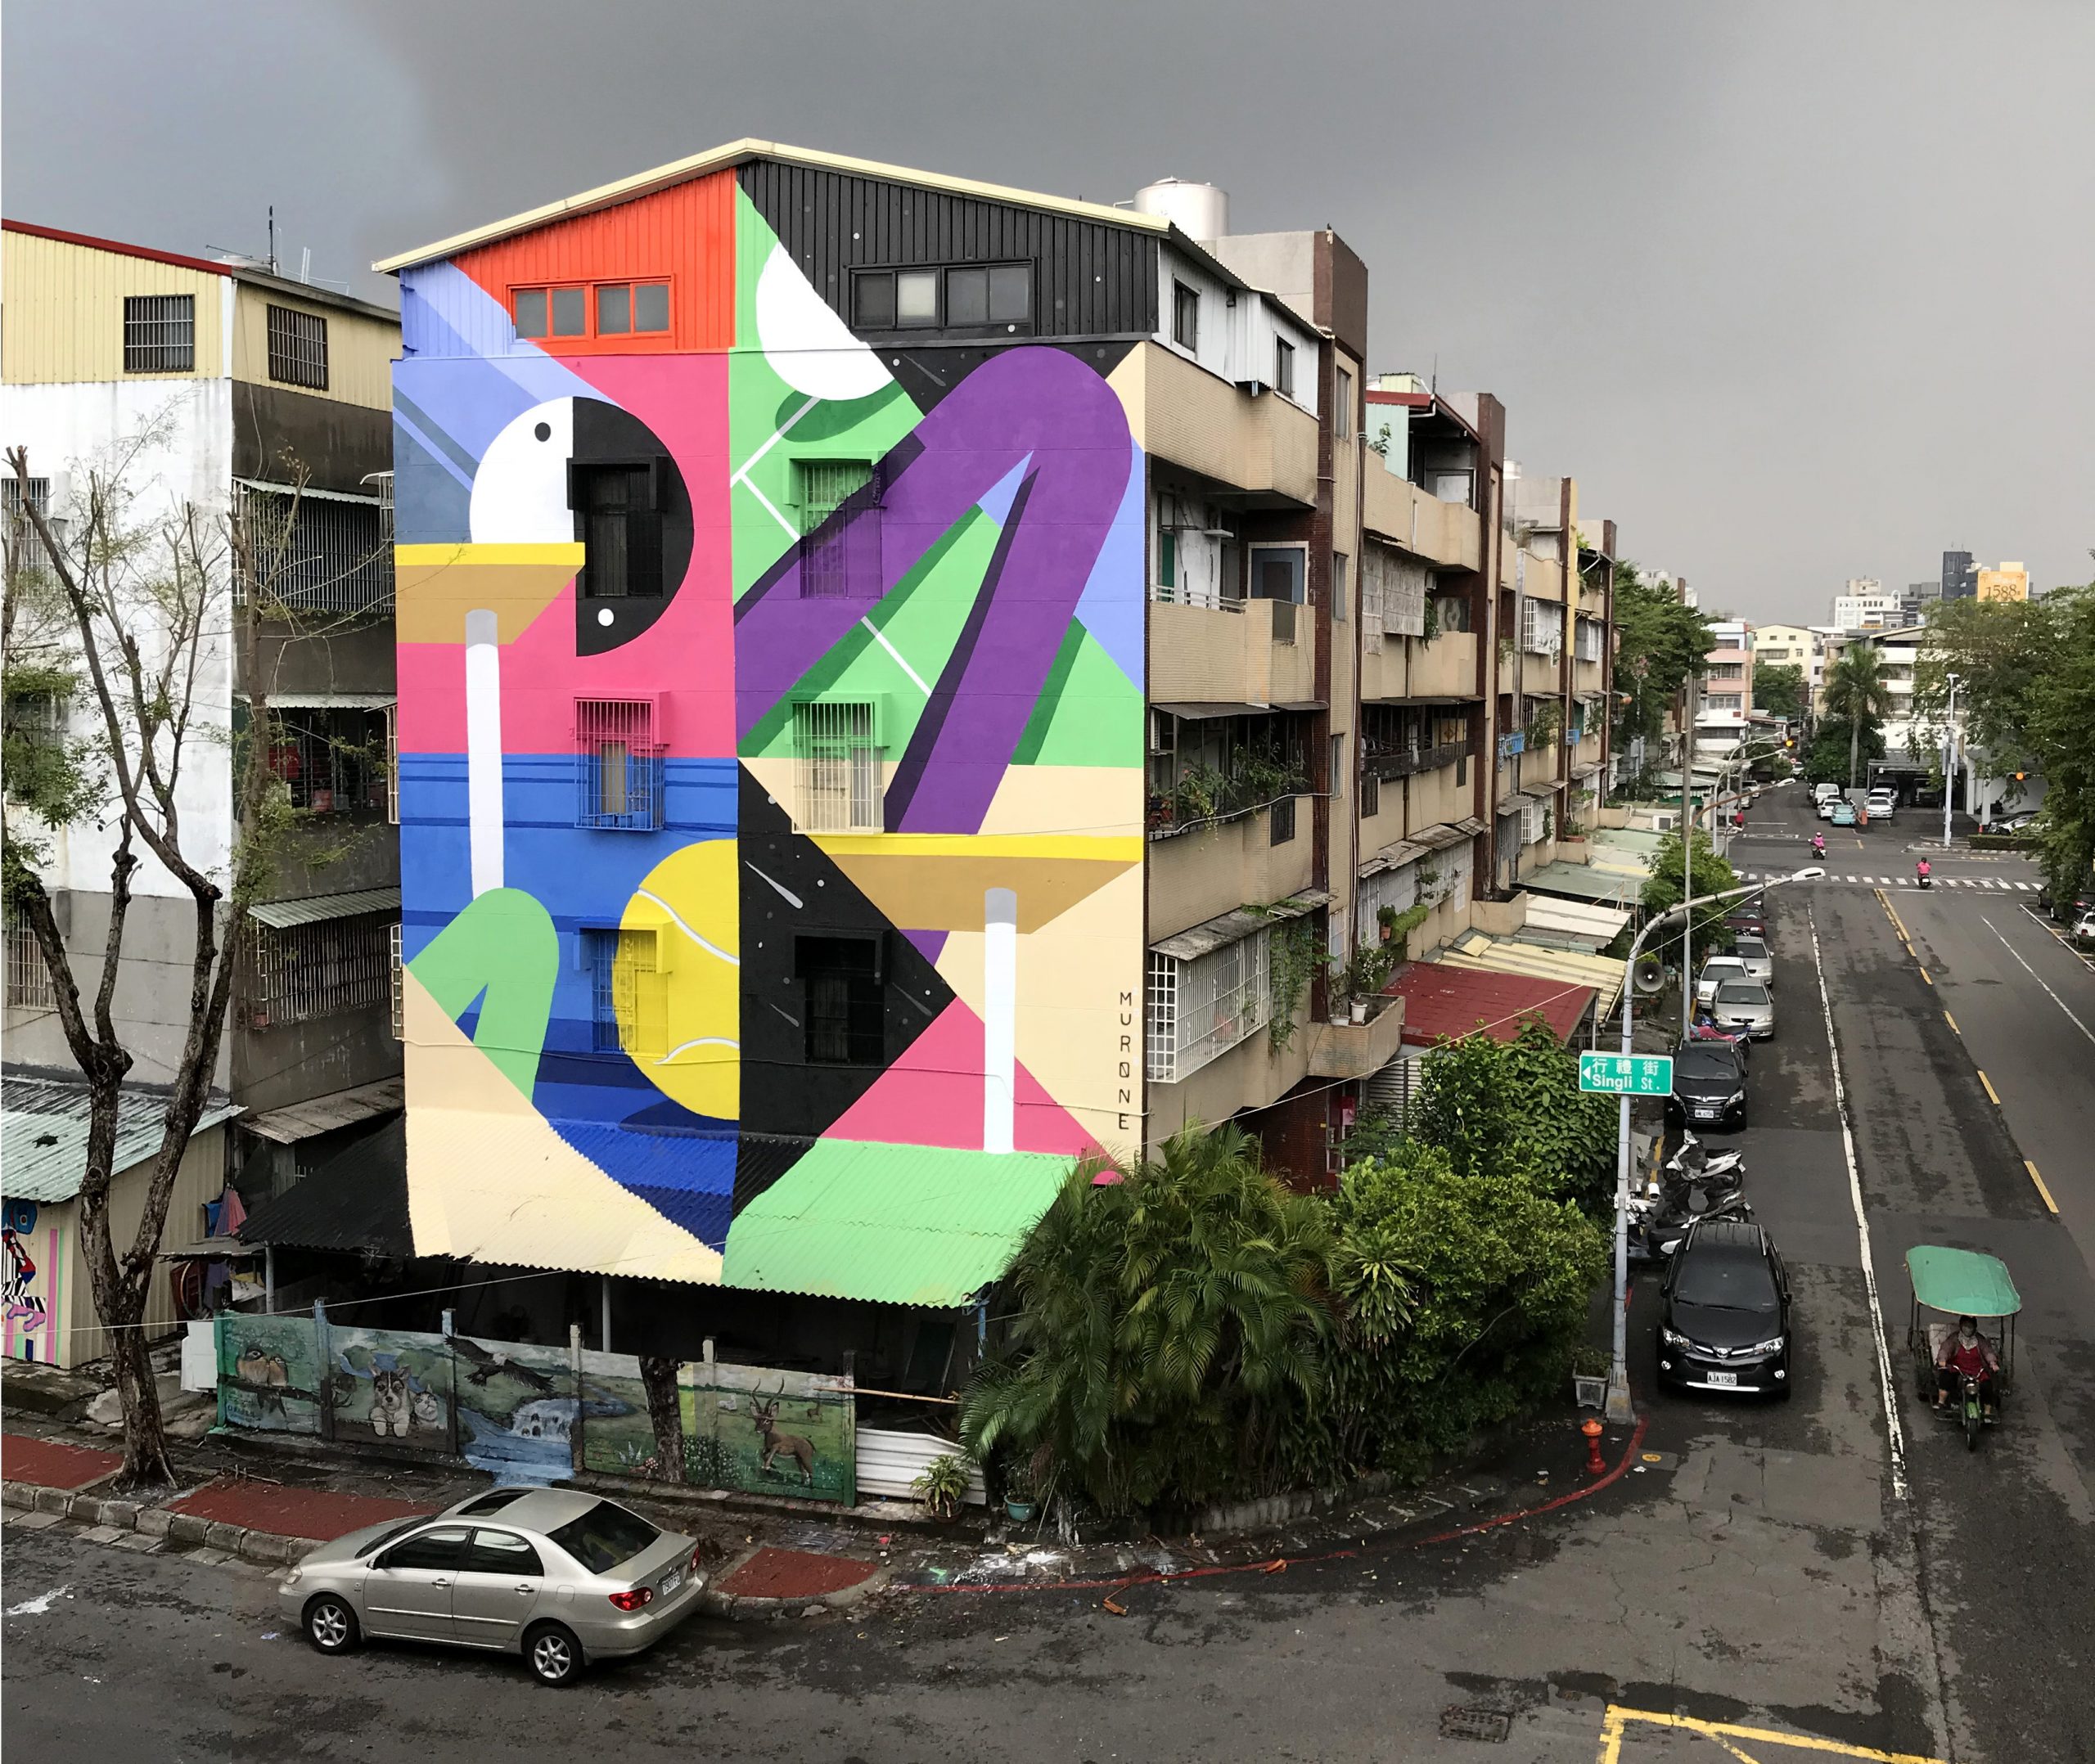 TAIWAN Kaohsiung, June 2018, for Arcade Art Gallery